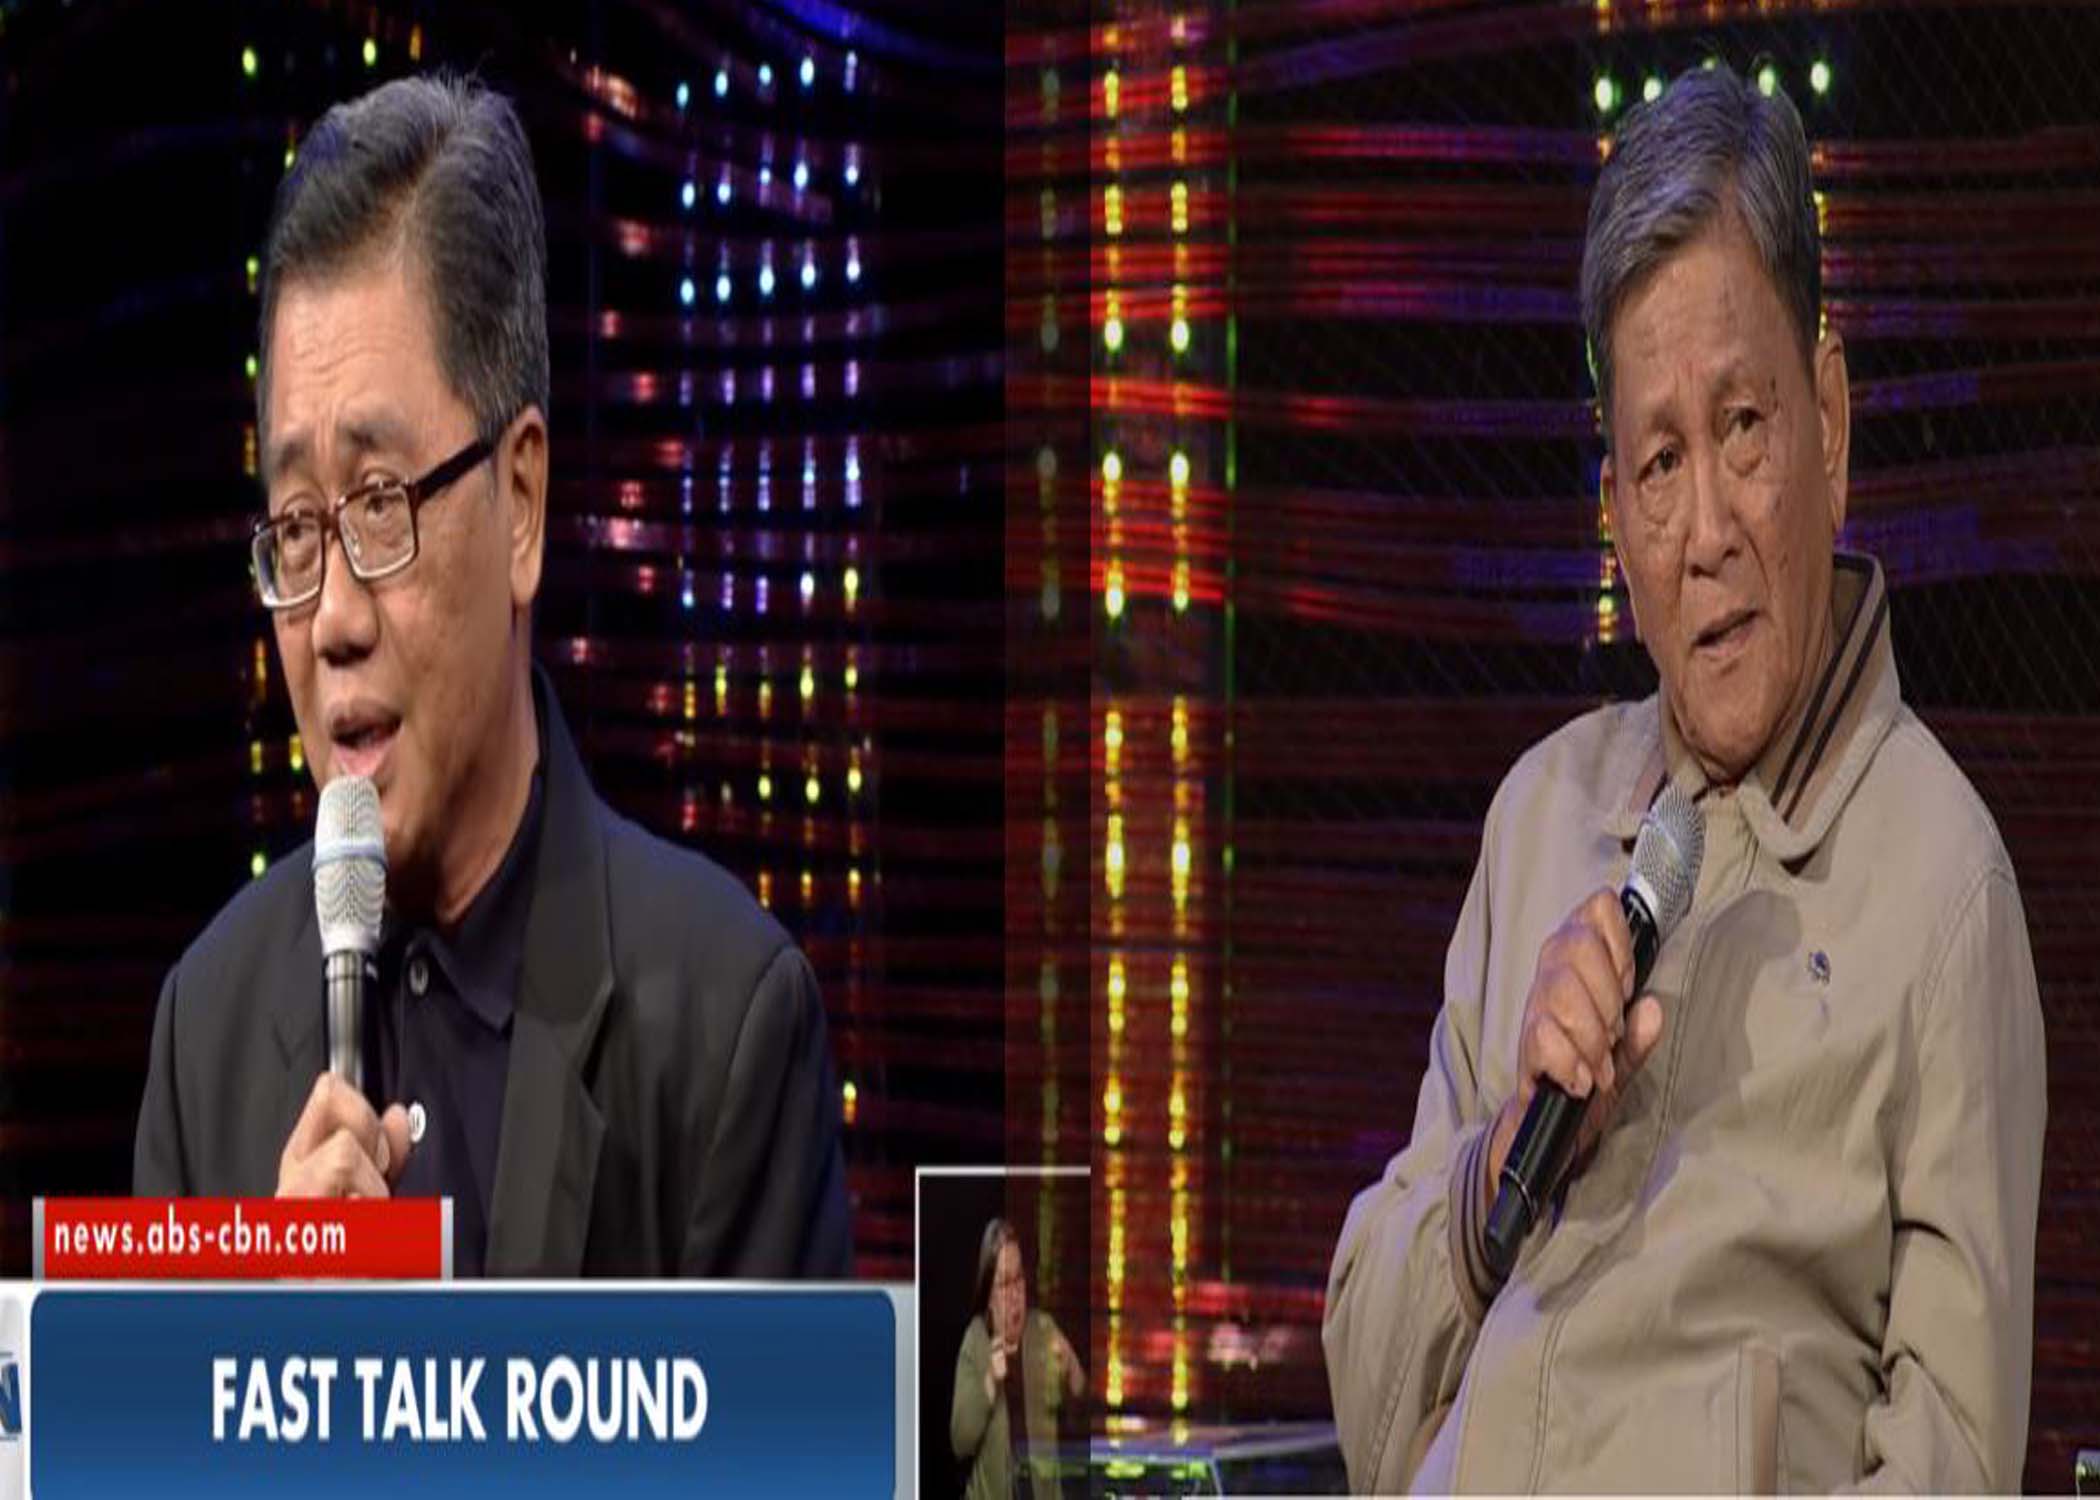 Senate hopefuls Ding Generoso and Ernesto Arellano speak at ABS-CBN Townhall debates earlier in March. (Source: Screengrabs from ABS-CBN Youtube channel)